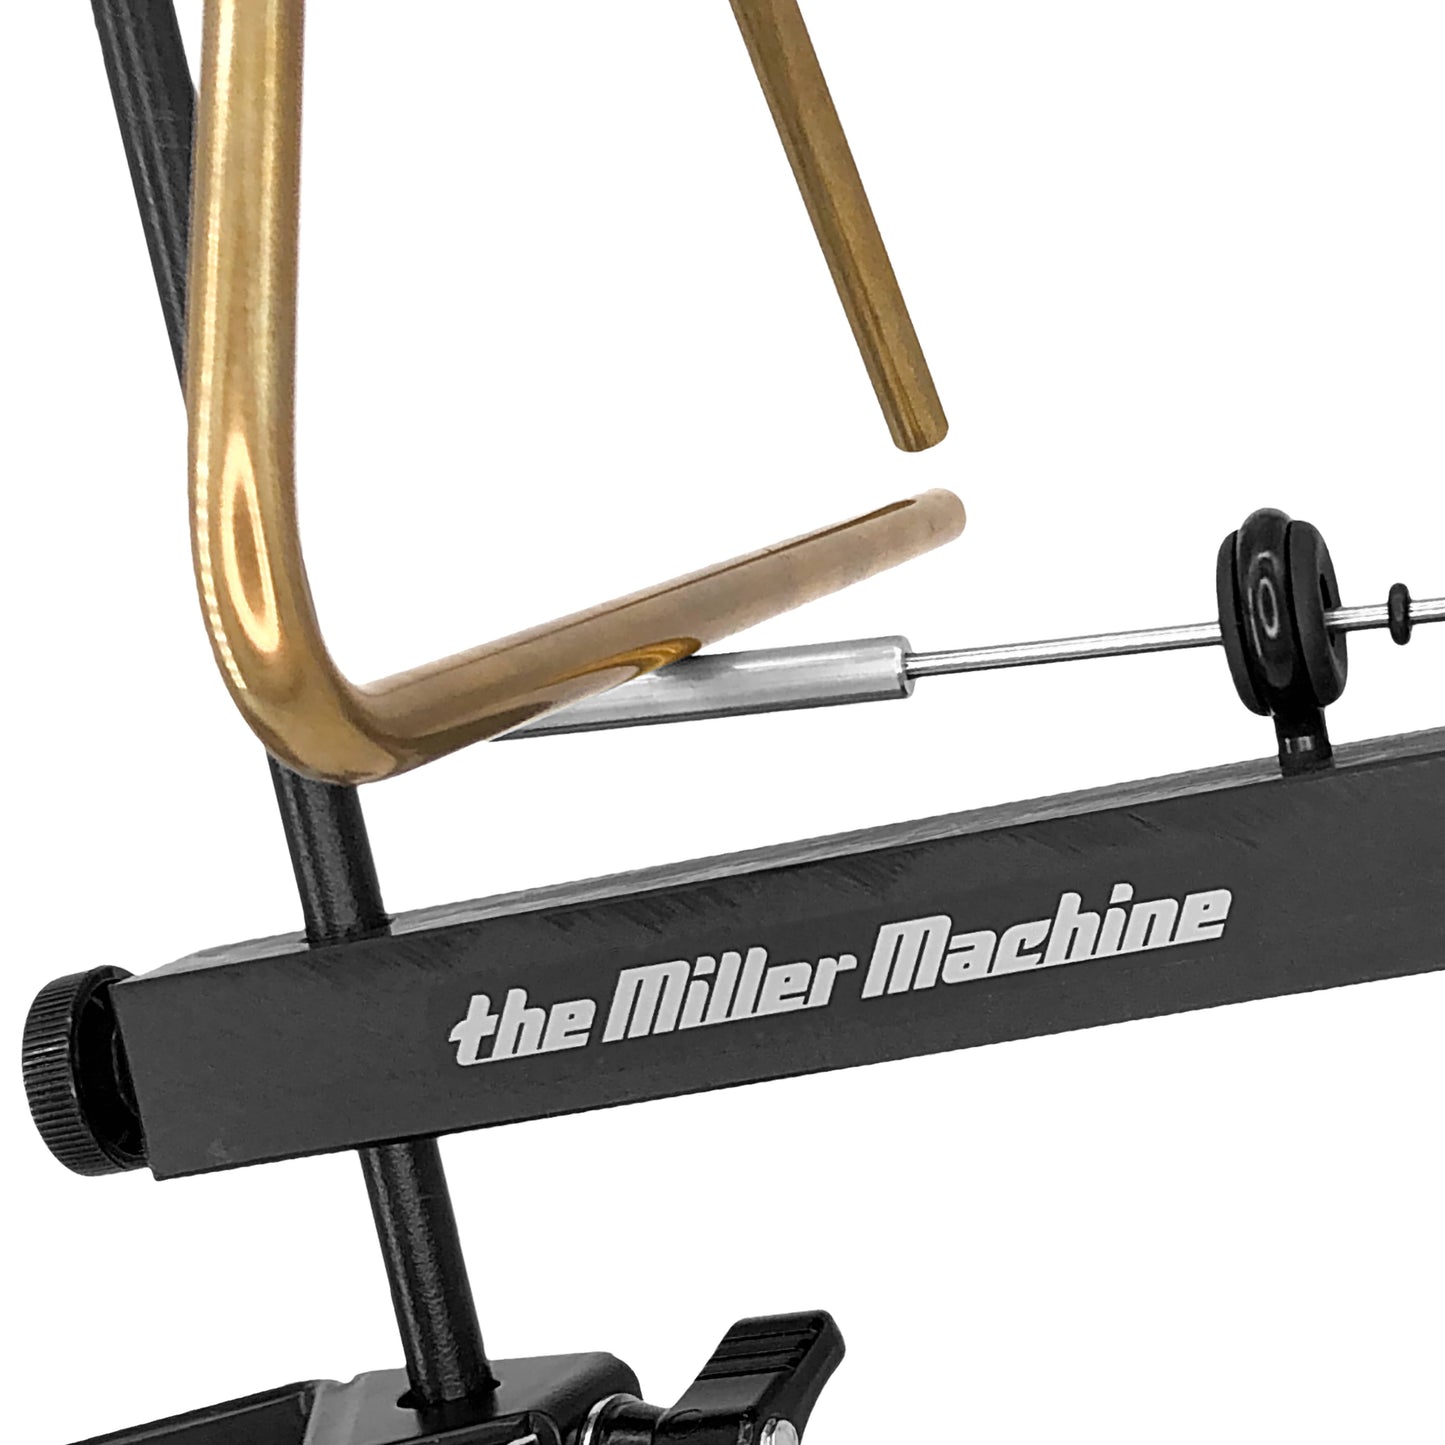 Photo of The Miller Machine, Triangle Machine, with mounted triangle.